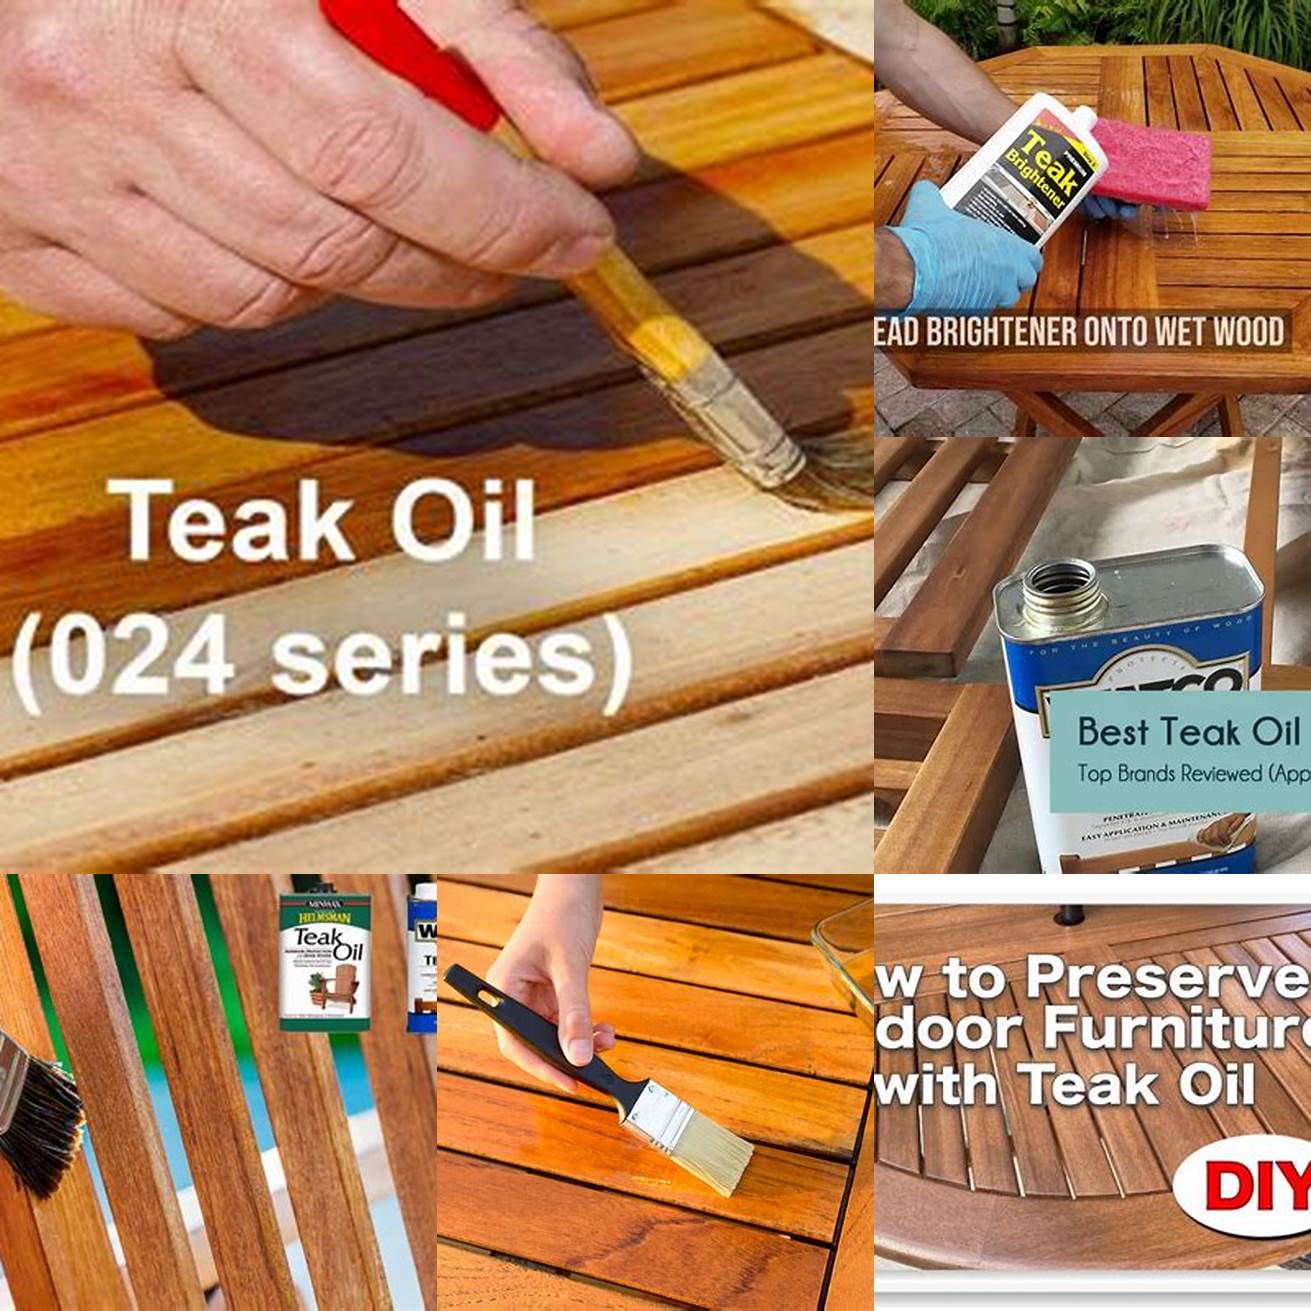 Photos of the best practices for applying teak oil